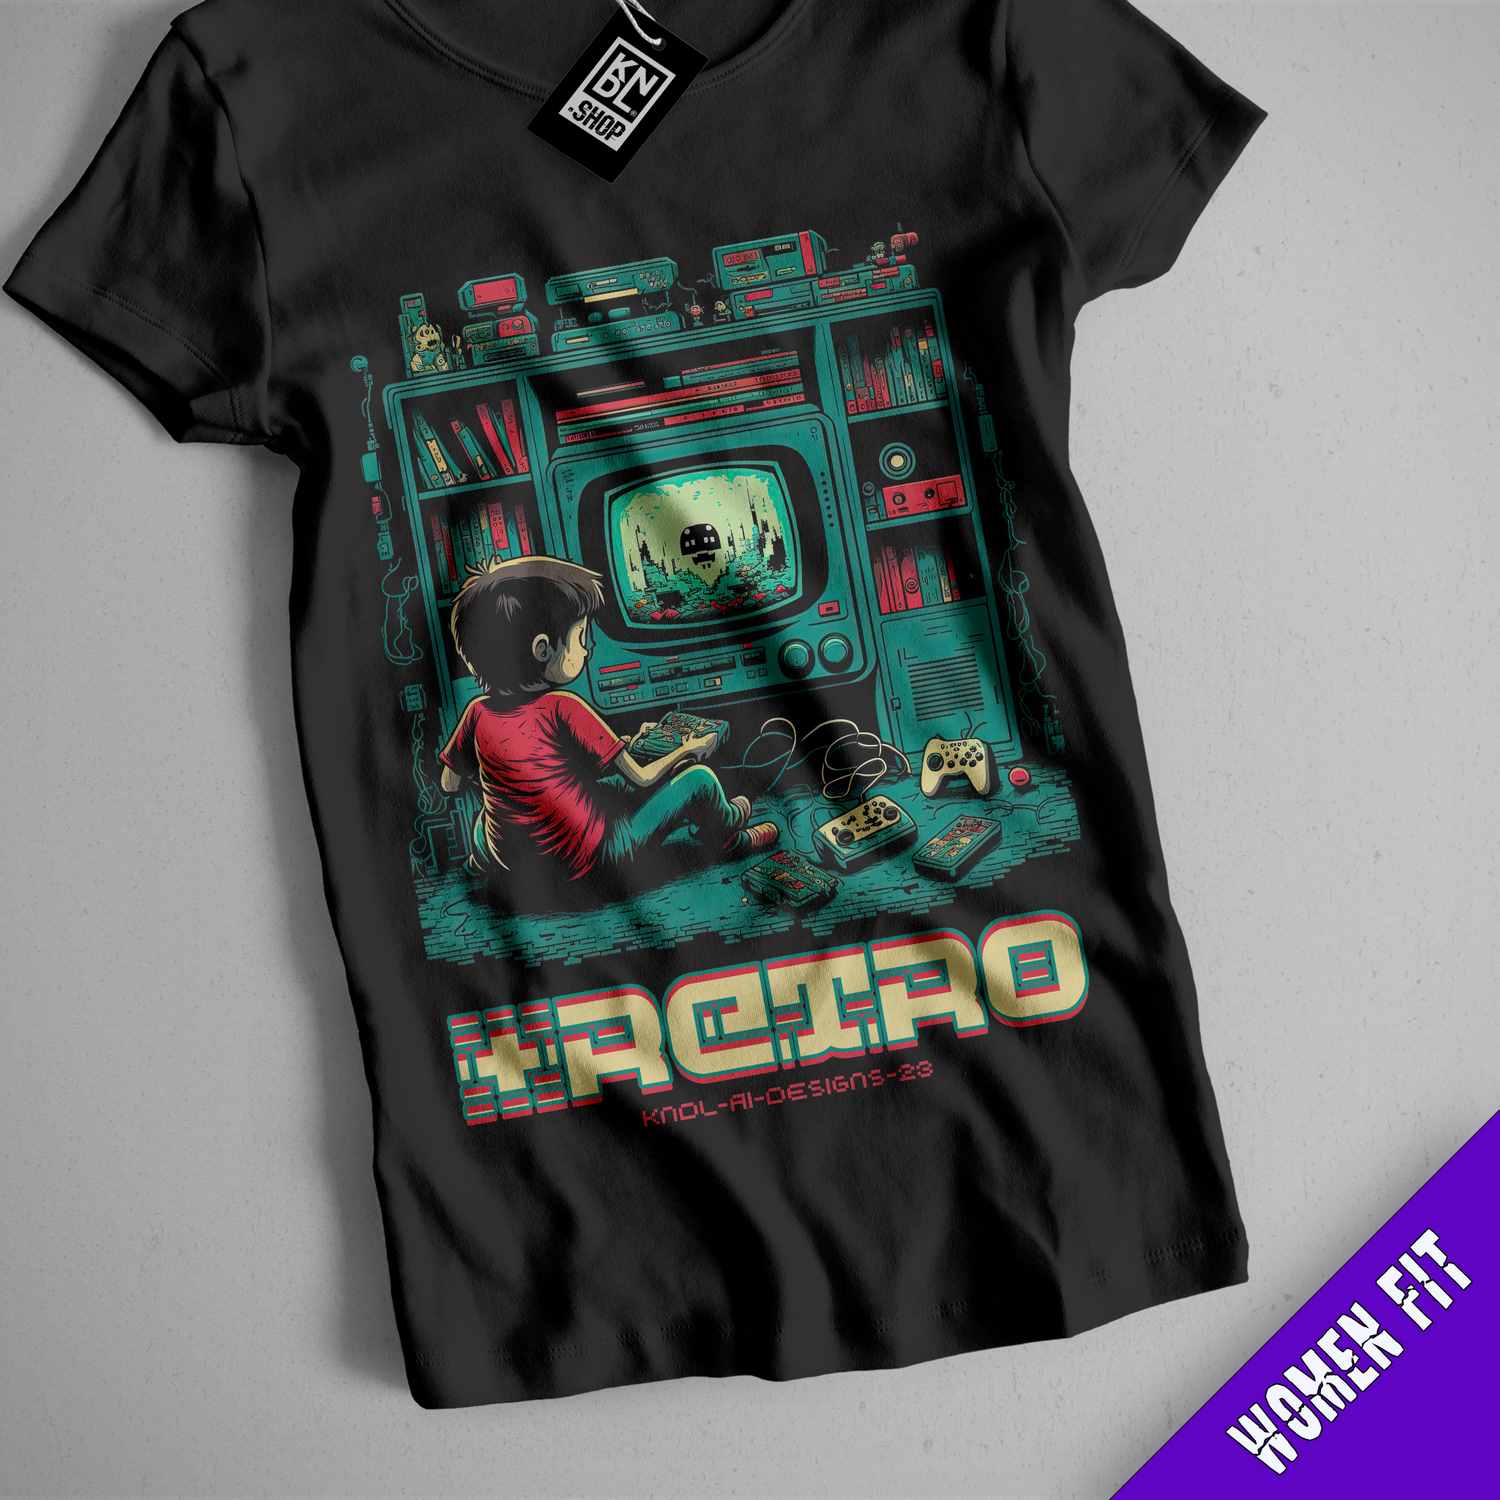 a t - shirt with an image of a boy playing a video game